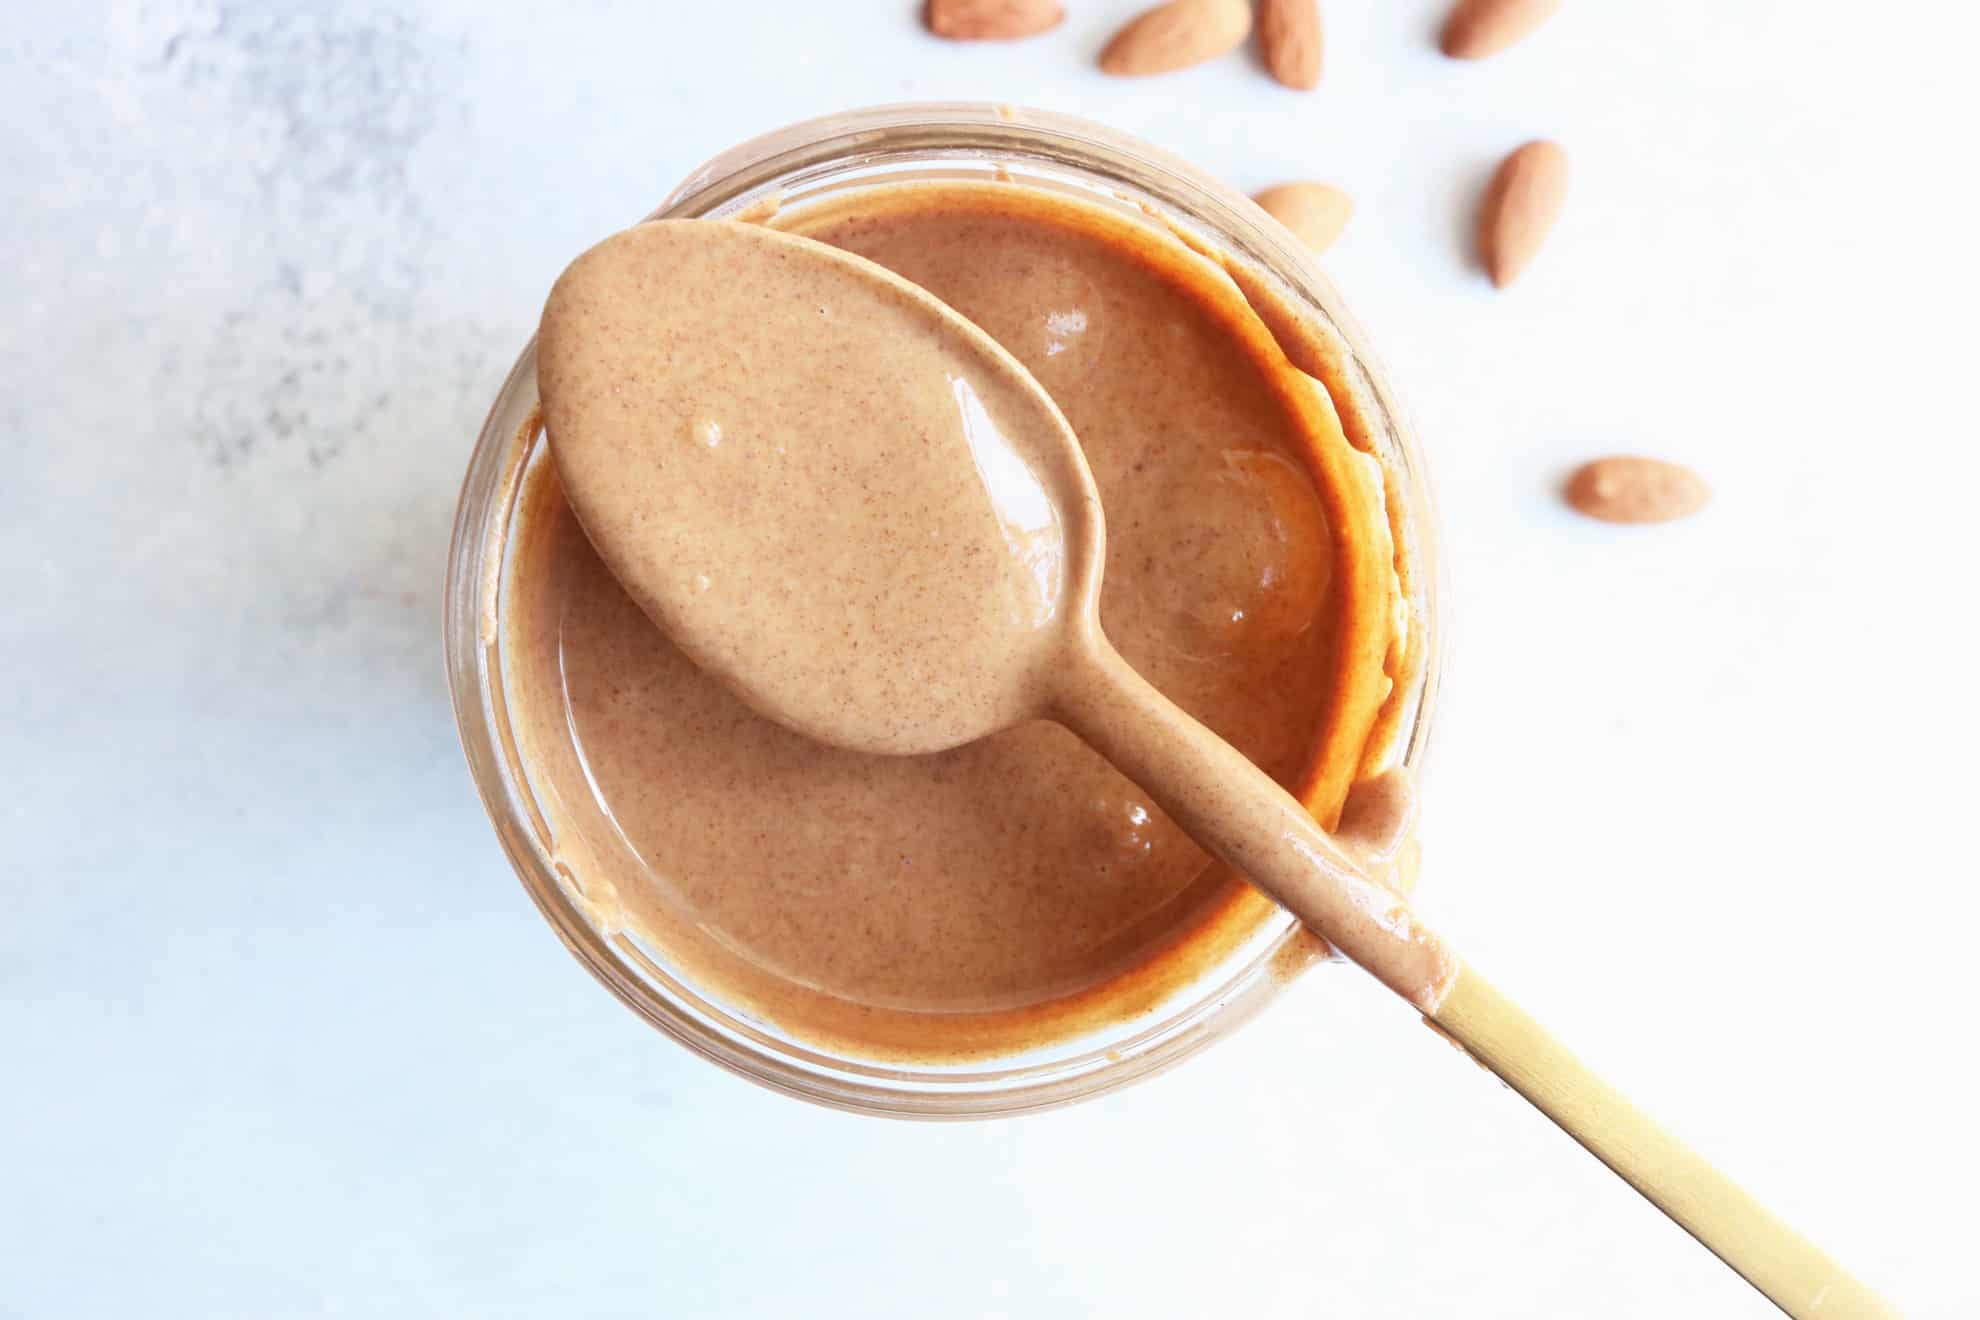 HOW TO: MAKE HOMEMADE ALMOND BUTTER